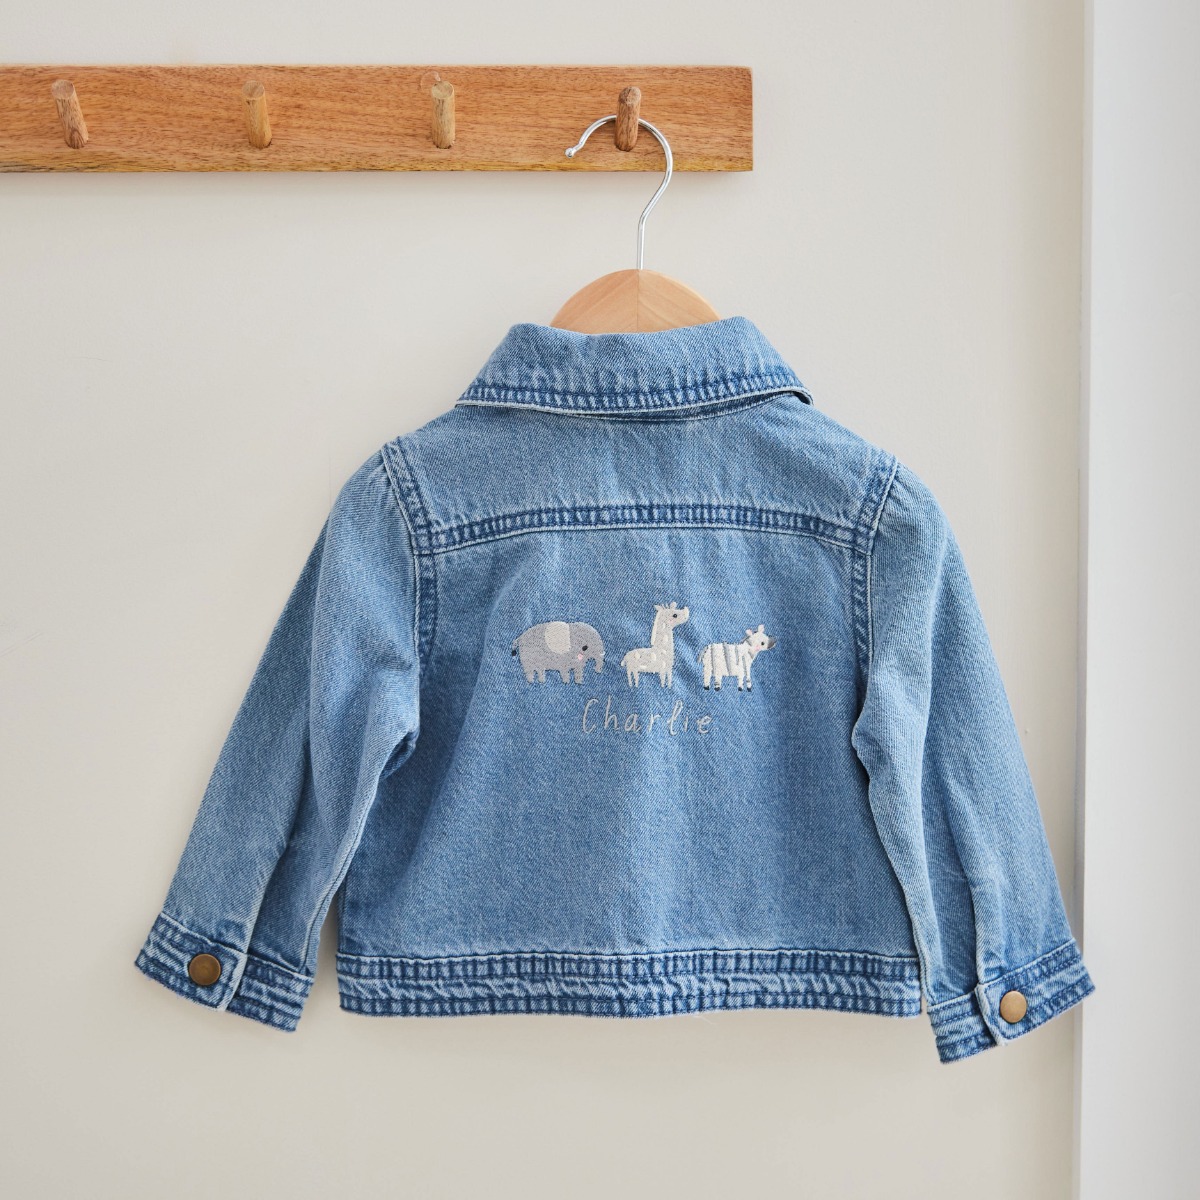 Personalised Welcome to the World Children's Denim Jacket